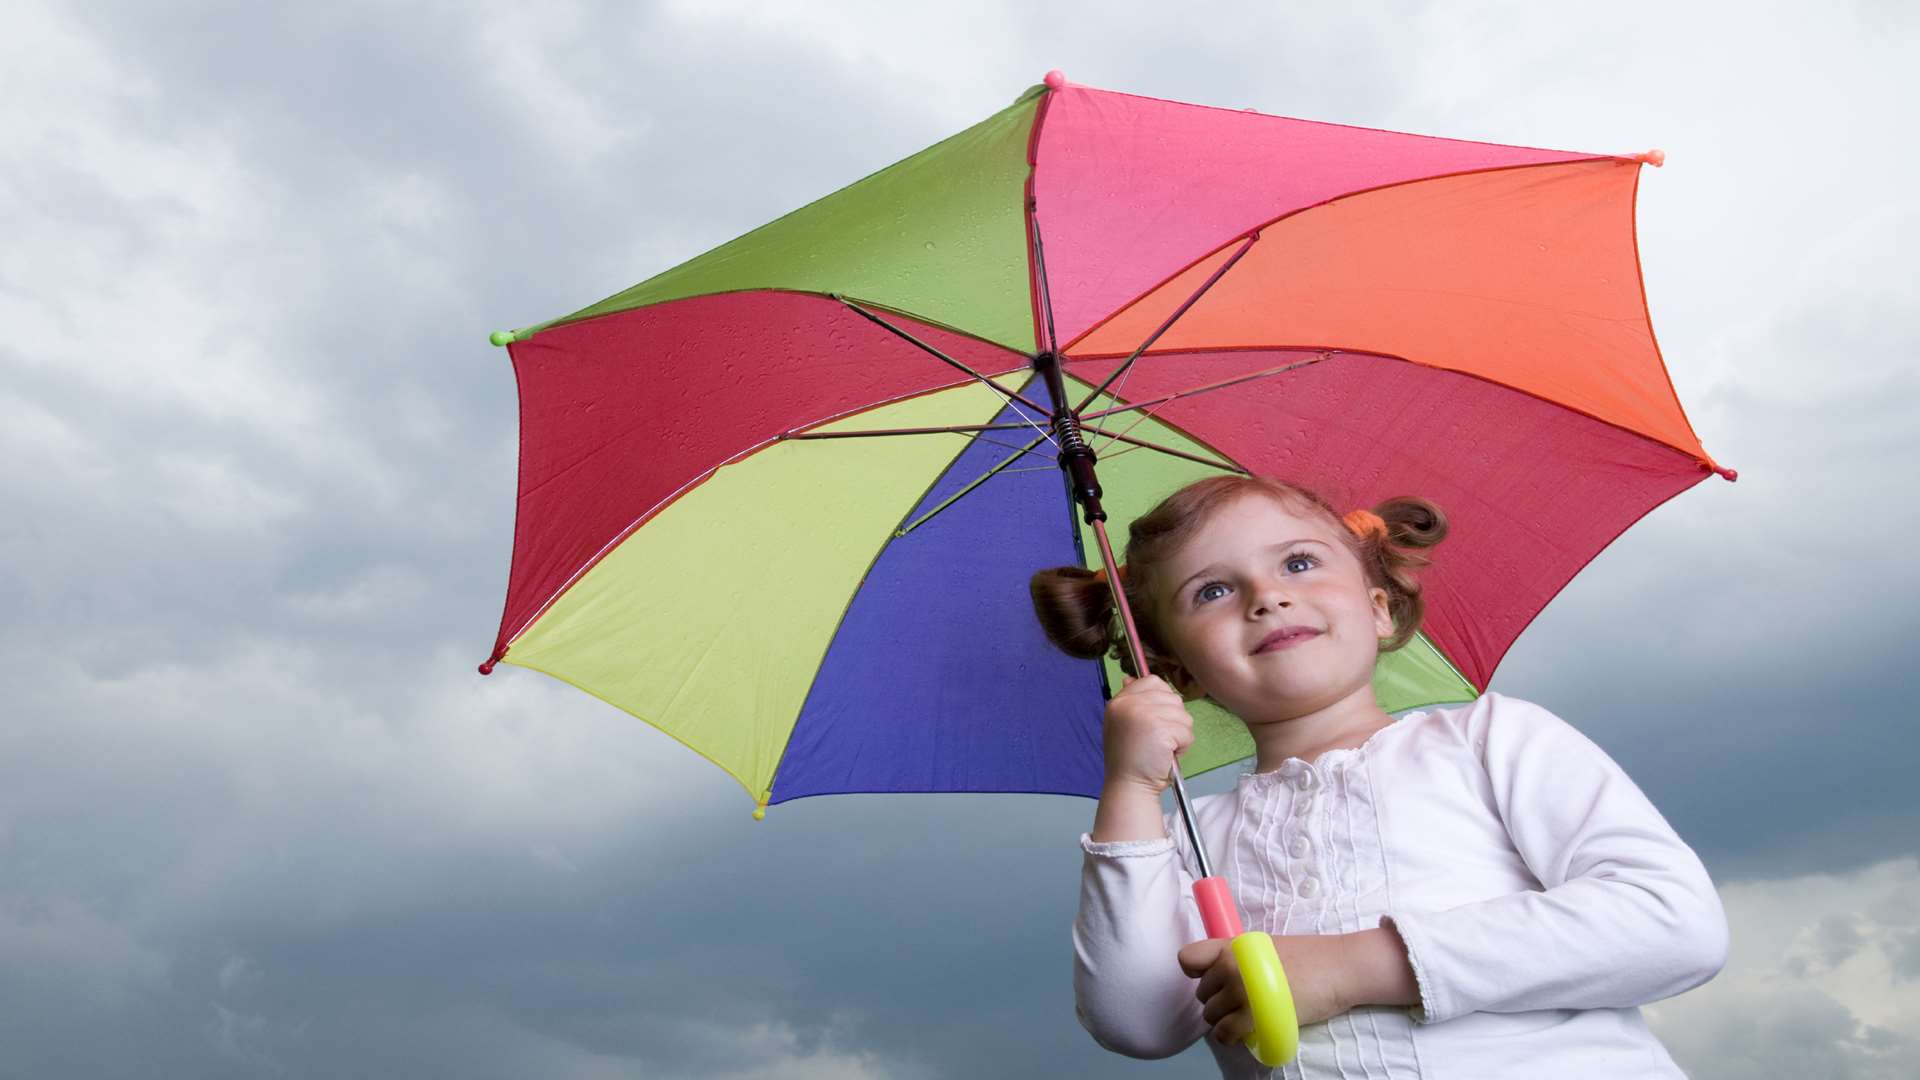 A rainy day with the children can be extremely stressful for parents